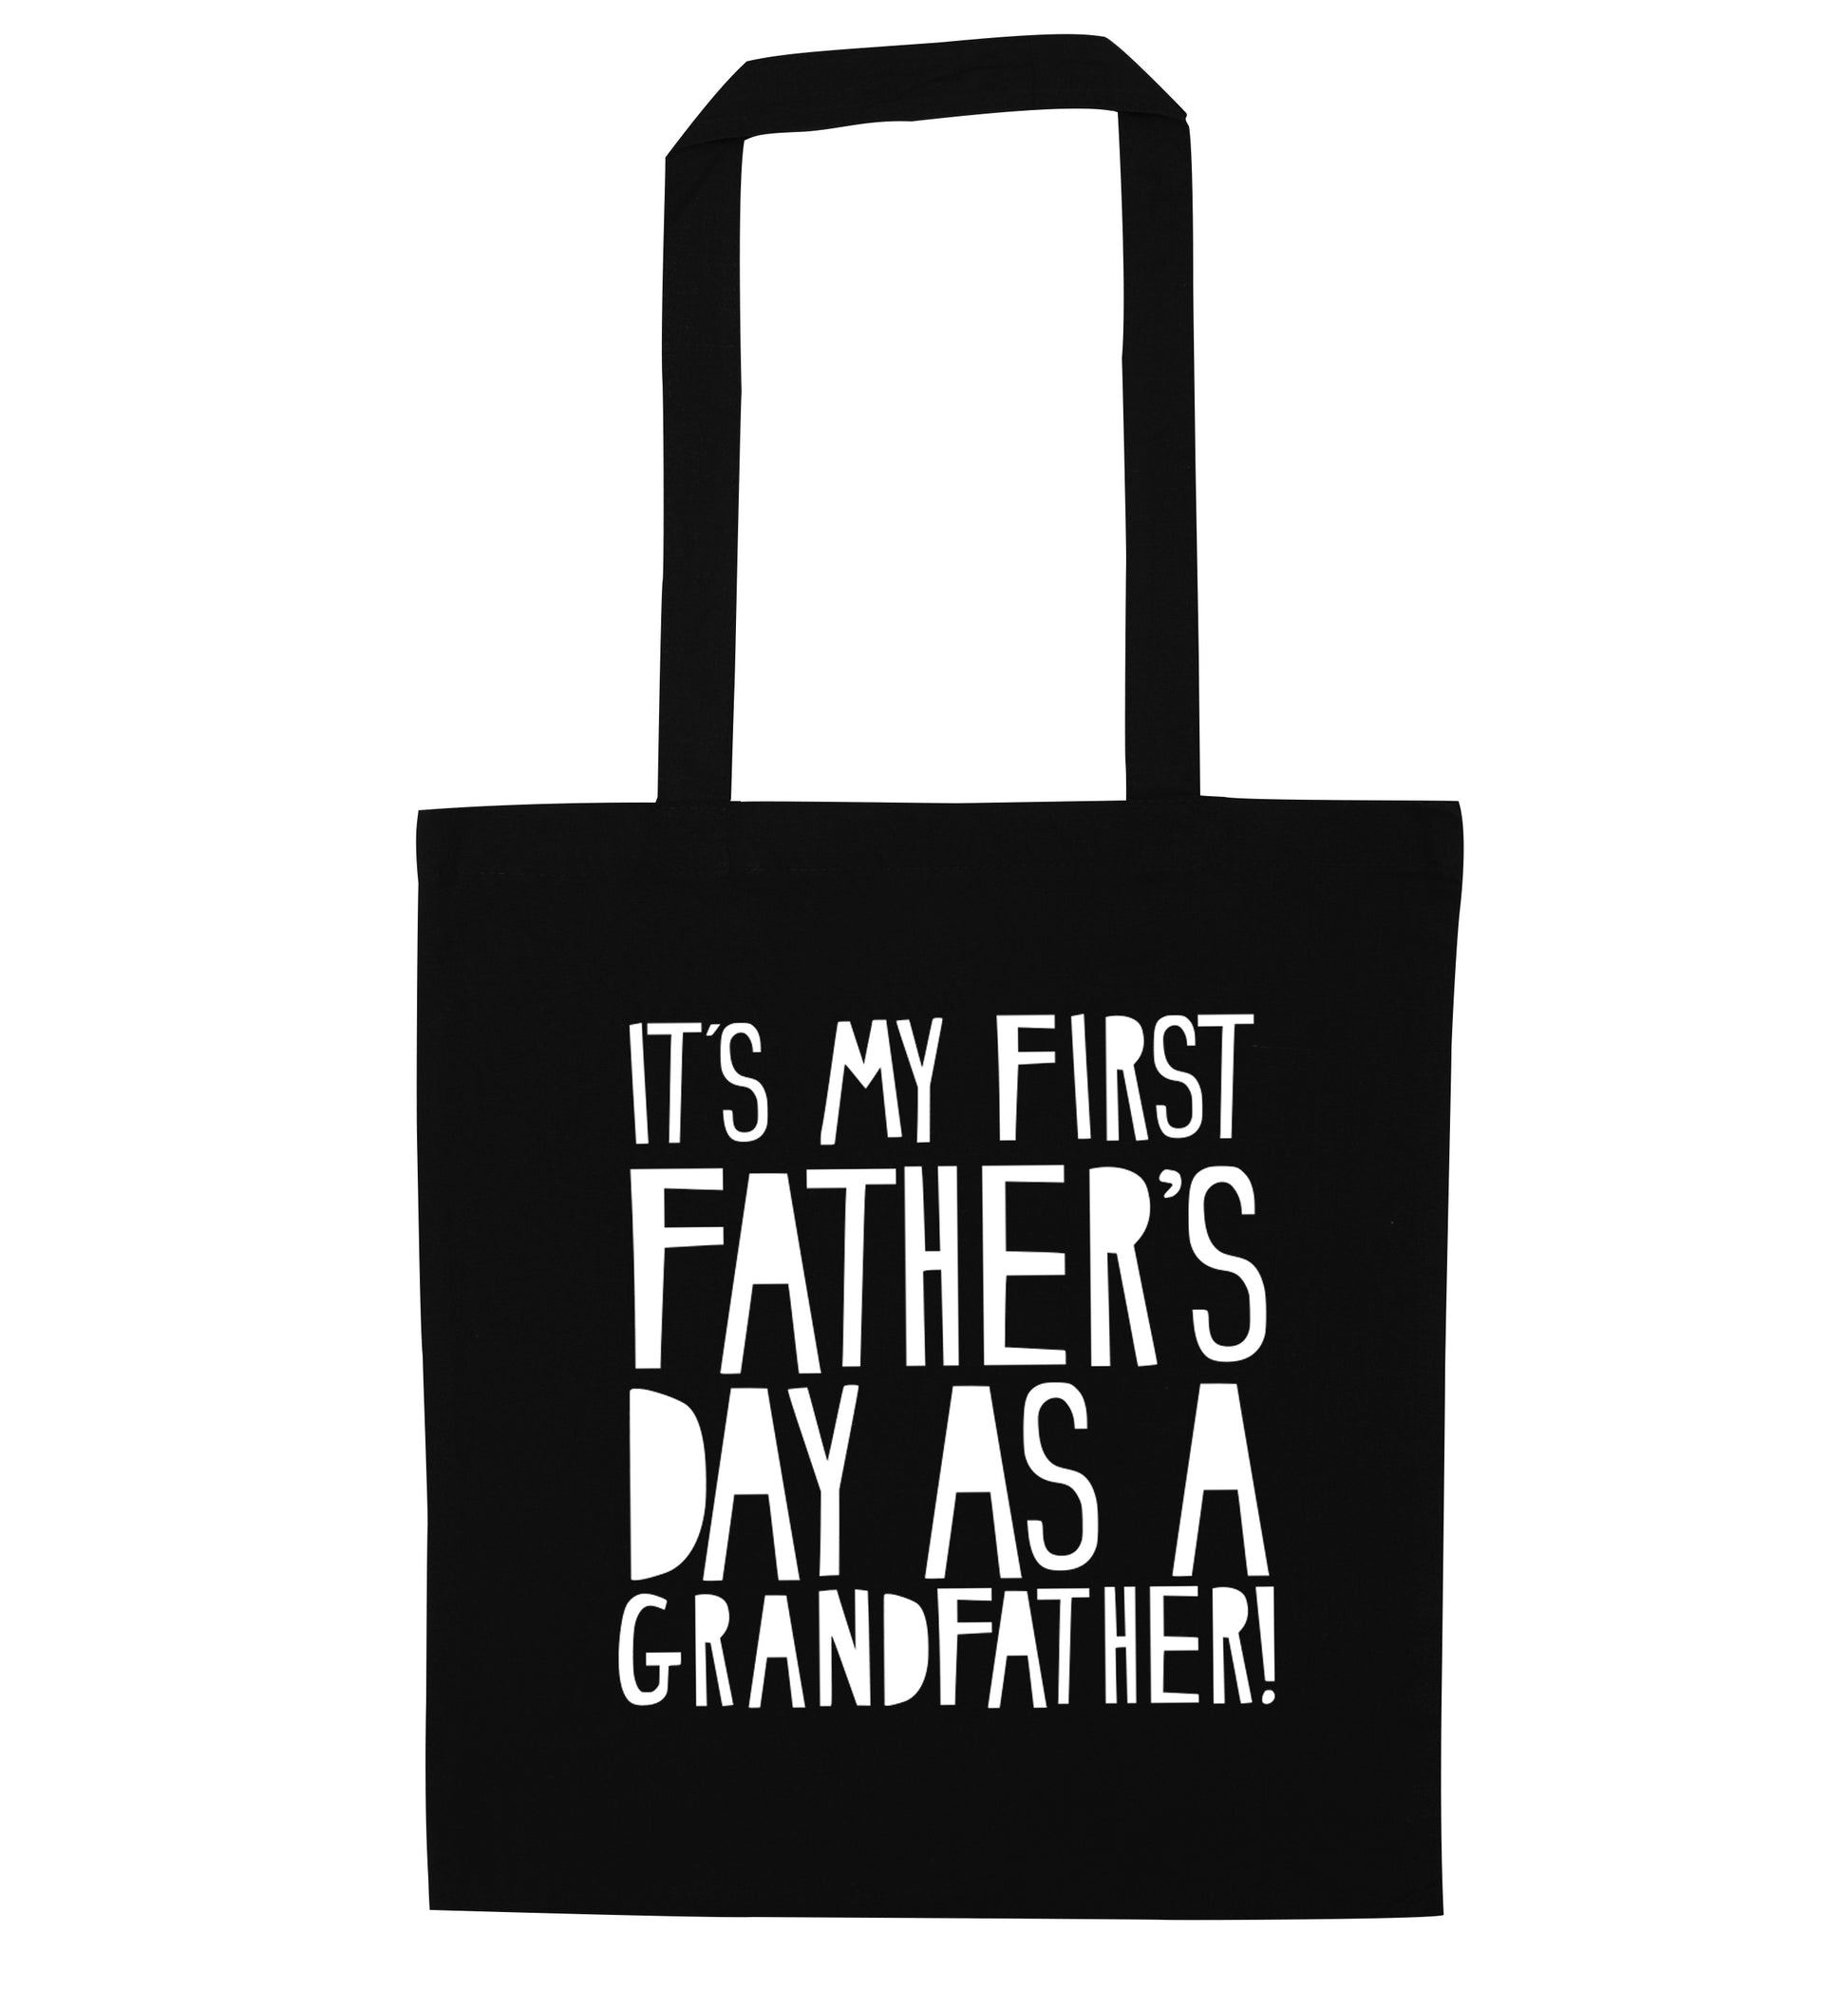 It's my first Father's Day as a Grandfather! black tote bag